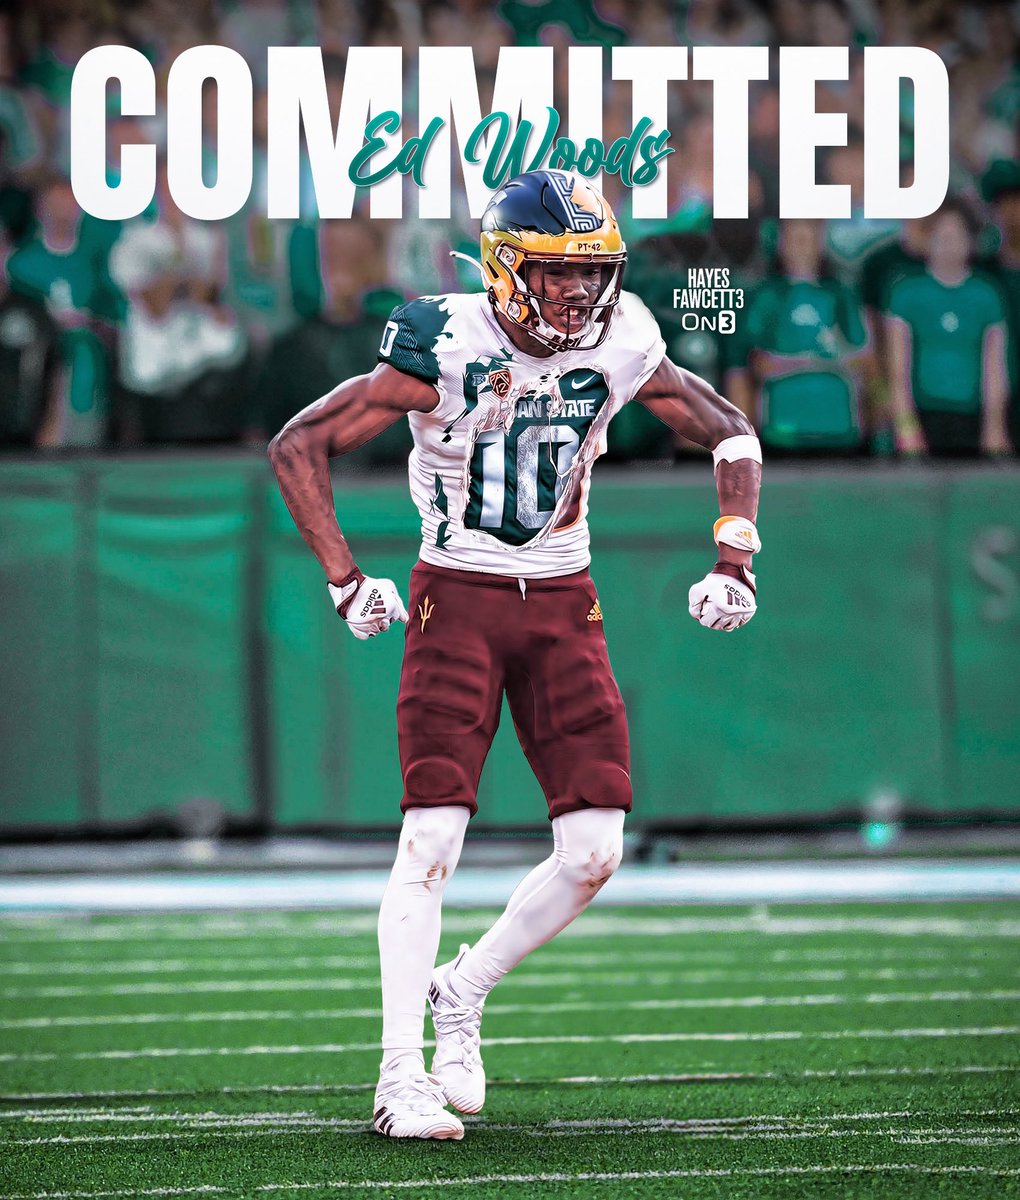 BREAKING: Former Arizona State DB Ed Woods has Committed to Michigan State, he tells @on3sports The 5’11 180 DB was a 2 year starter for the Sun Devils, totaling 66 Tackles & 3 FF Chose the Spartans over Alabama 1 year of eligibility remaining on3.com/db/edward-wood…